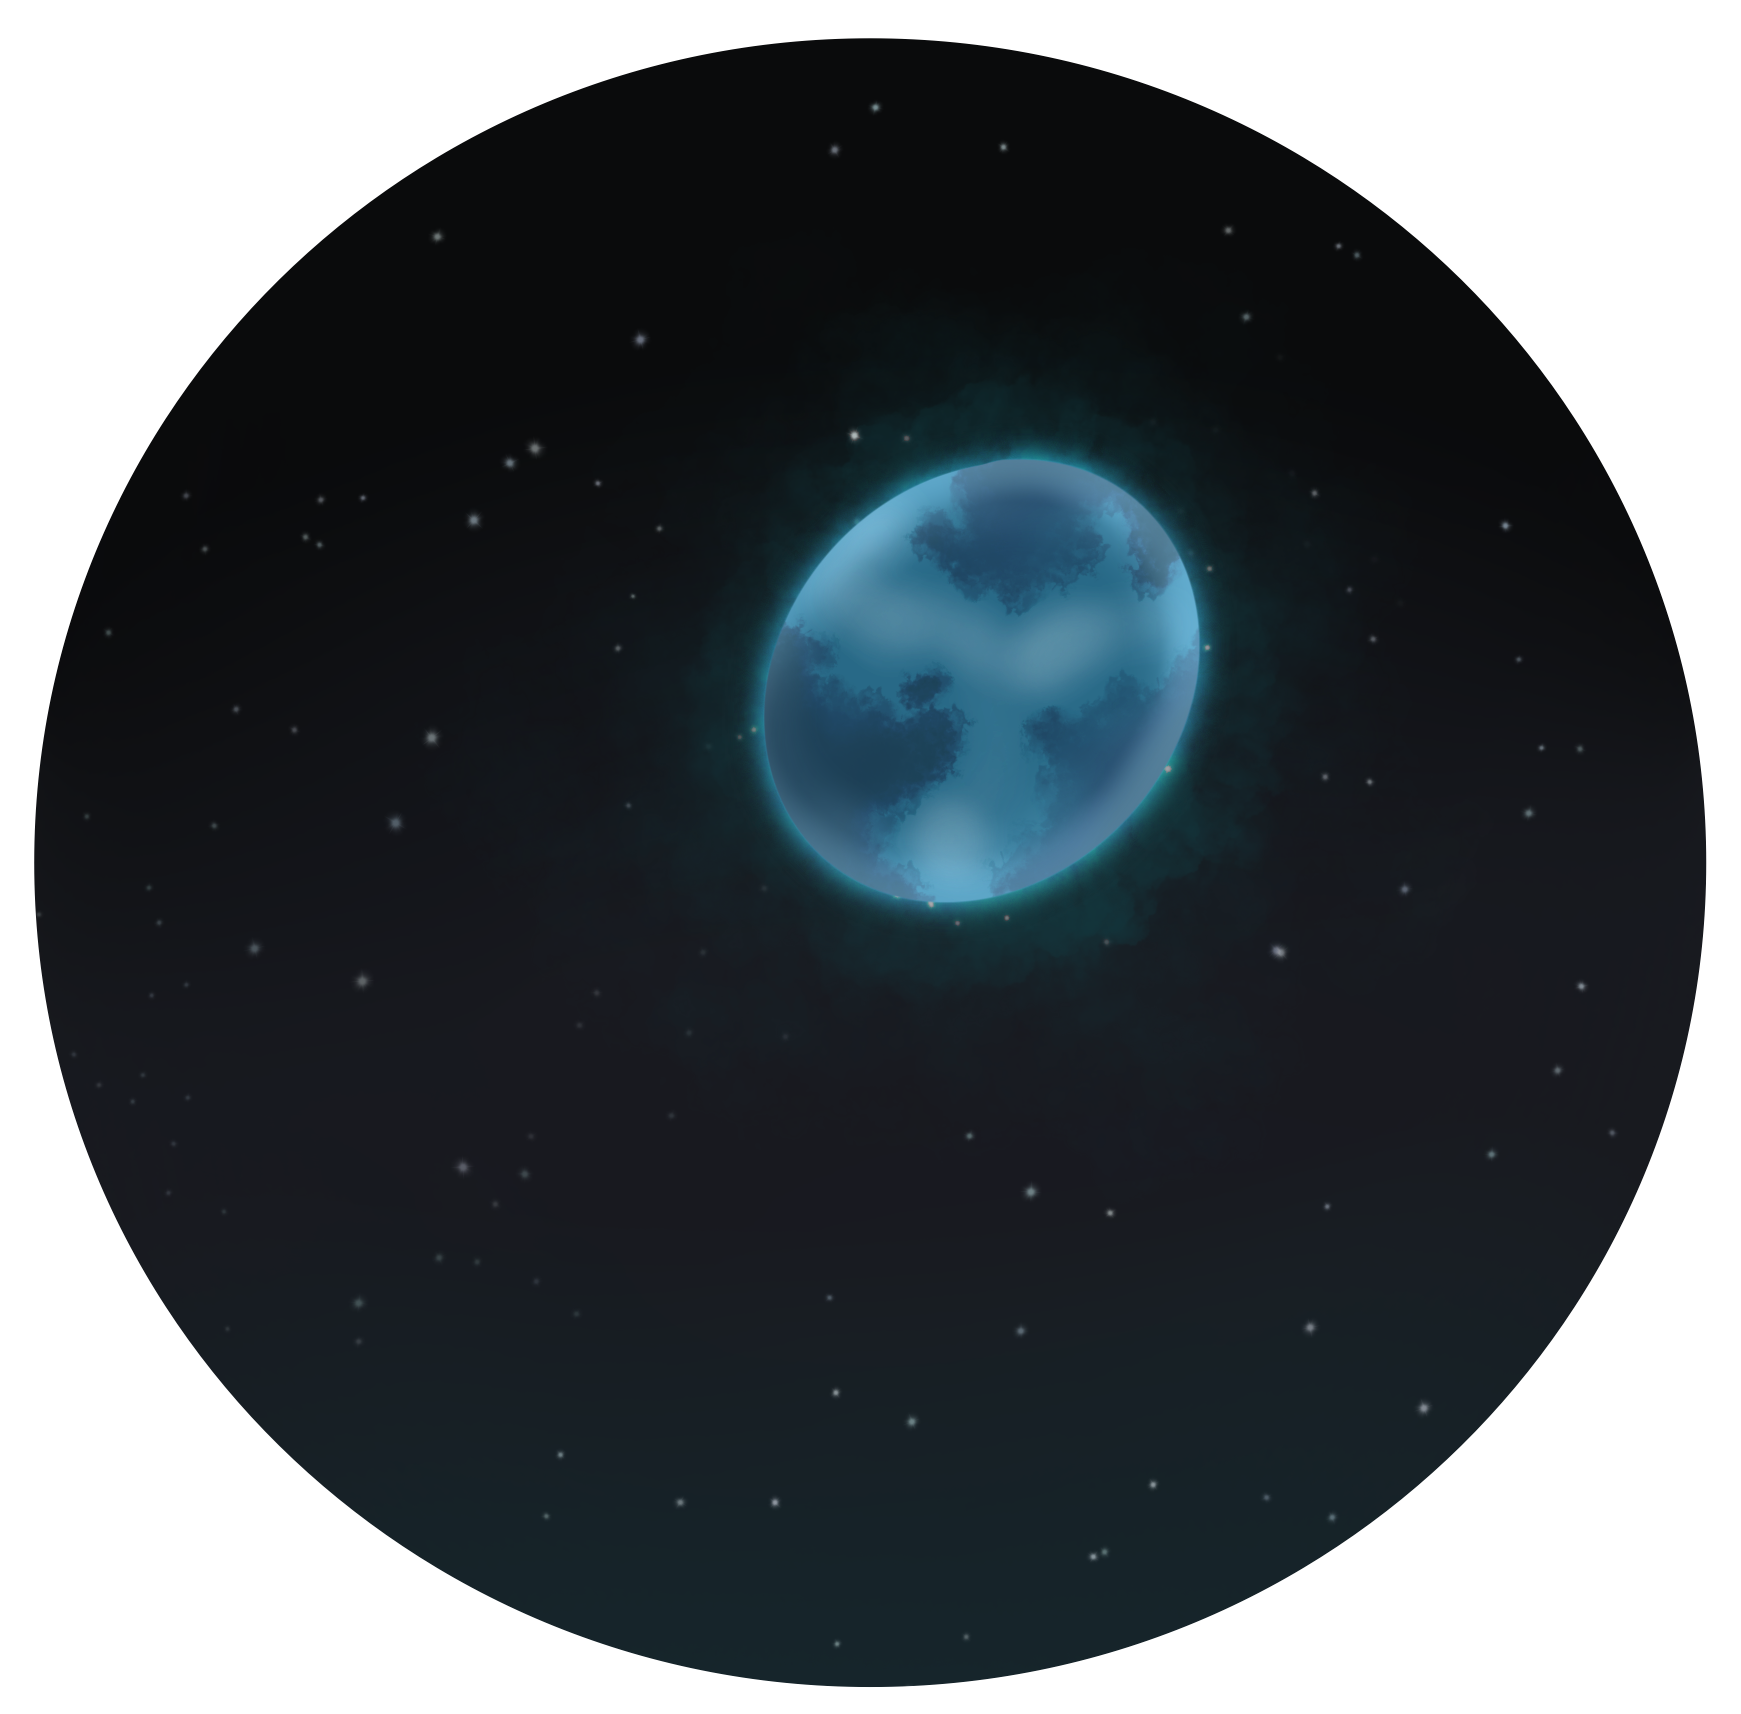 A blue, oblong-shaped moon with obvious landmarks, set in a night sky.